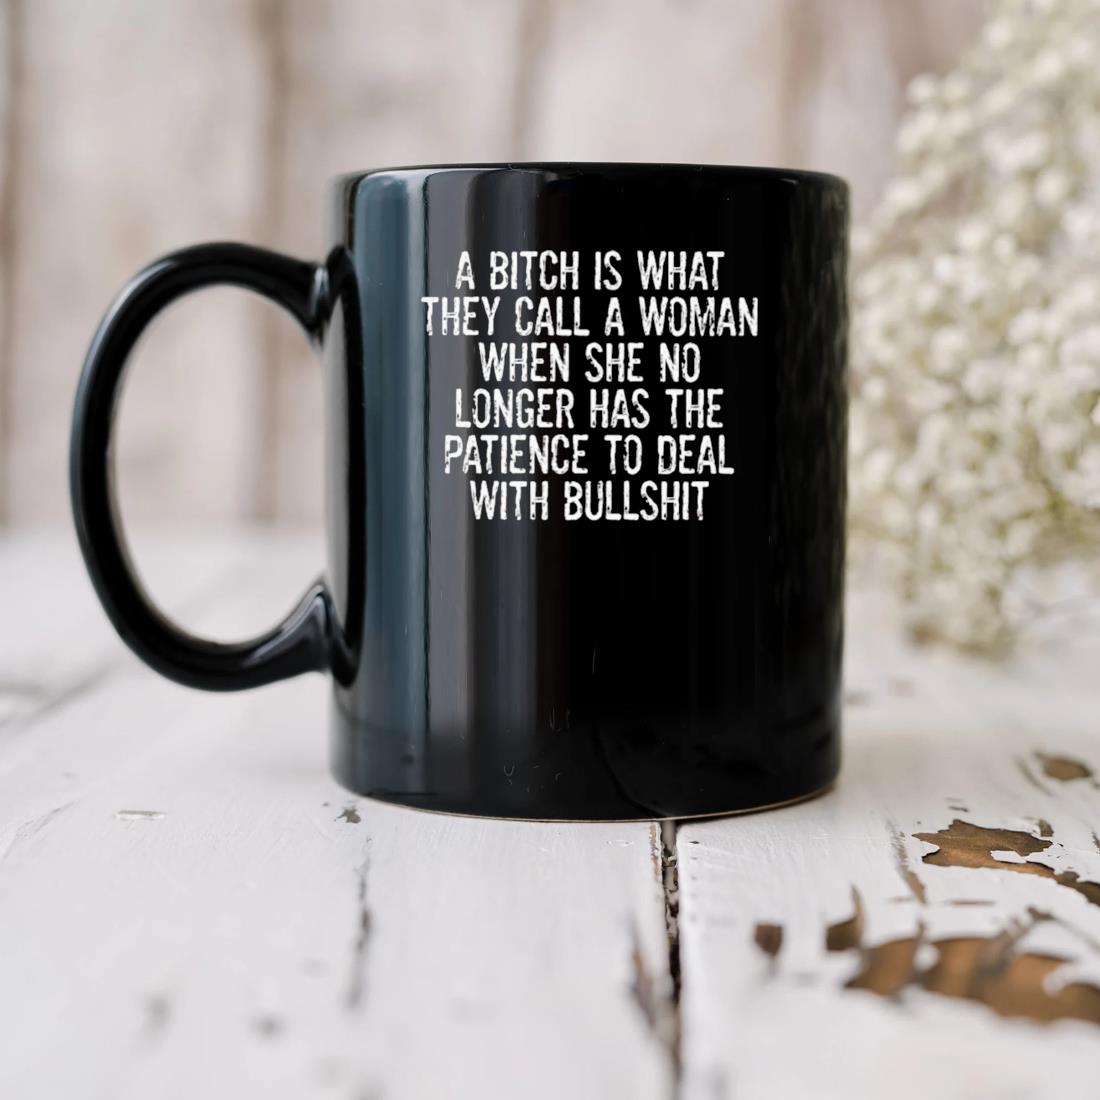 A Bitch Is What They Call A Woman When She No Longer Has The Patience To Deal With Bullshit Mug